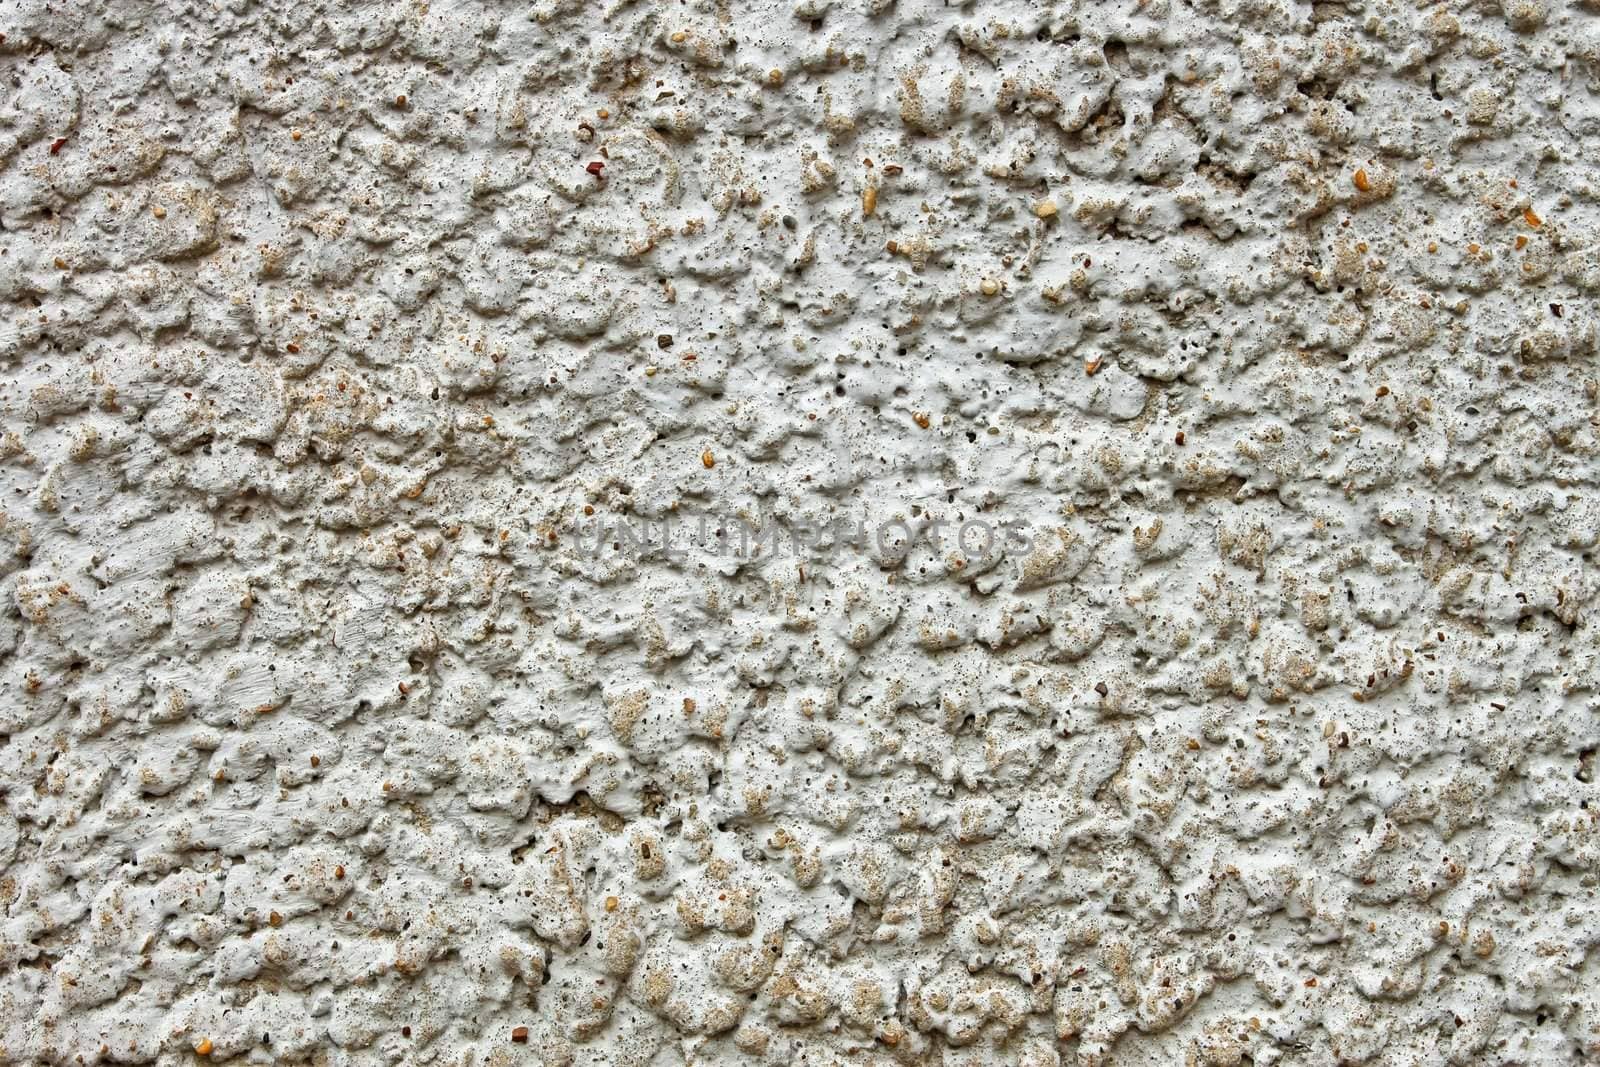 Relief concrete stucco wall covering. Macro shooting